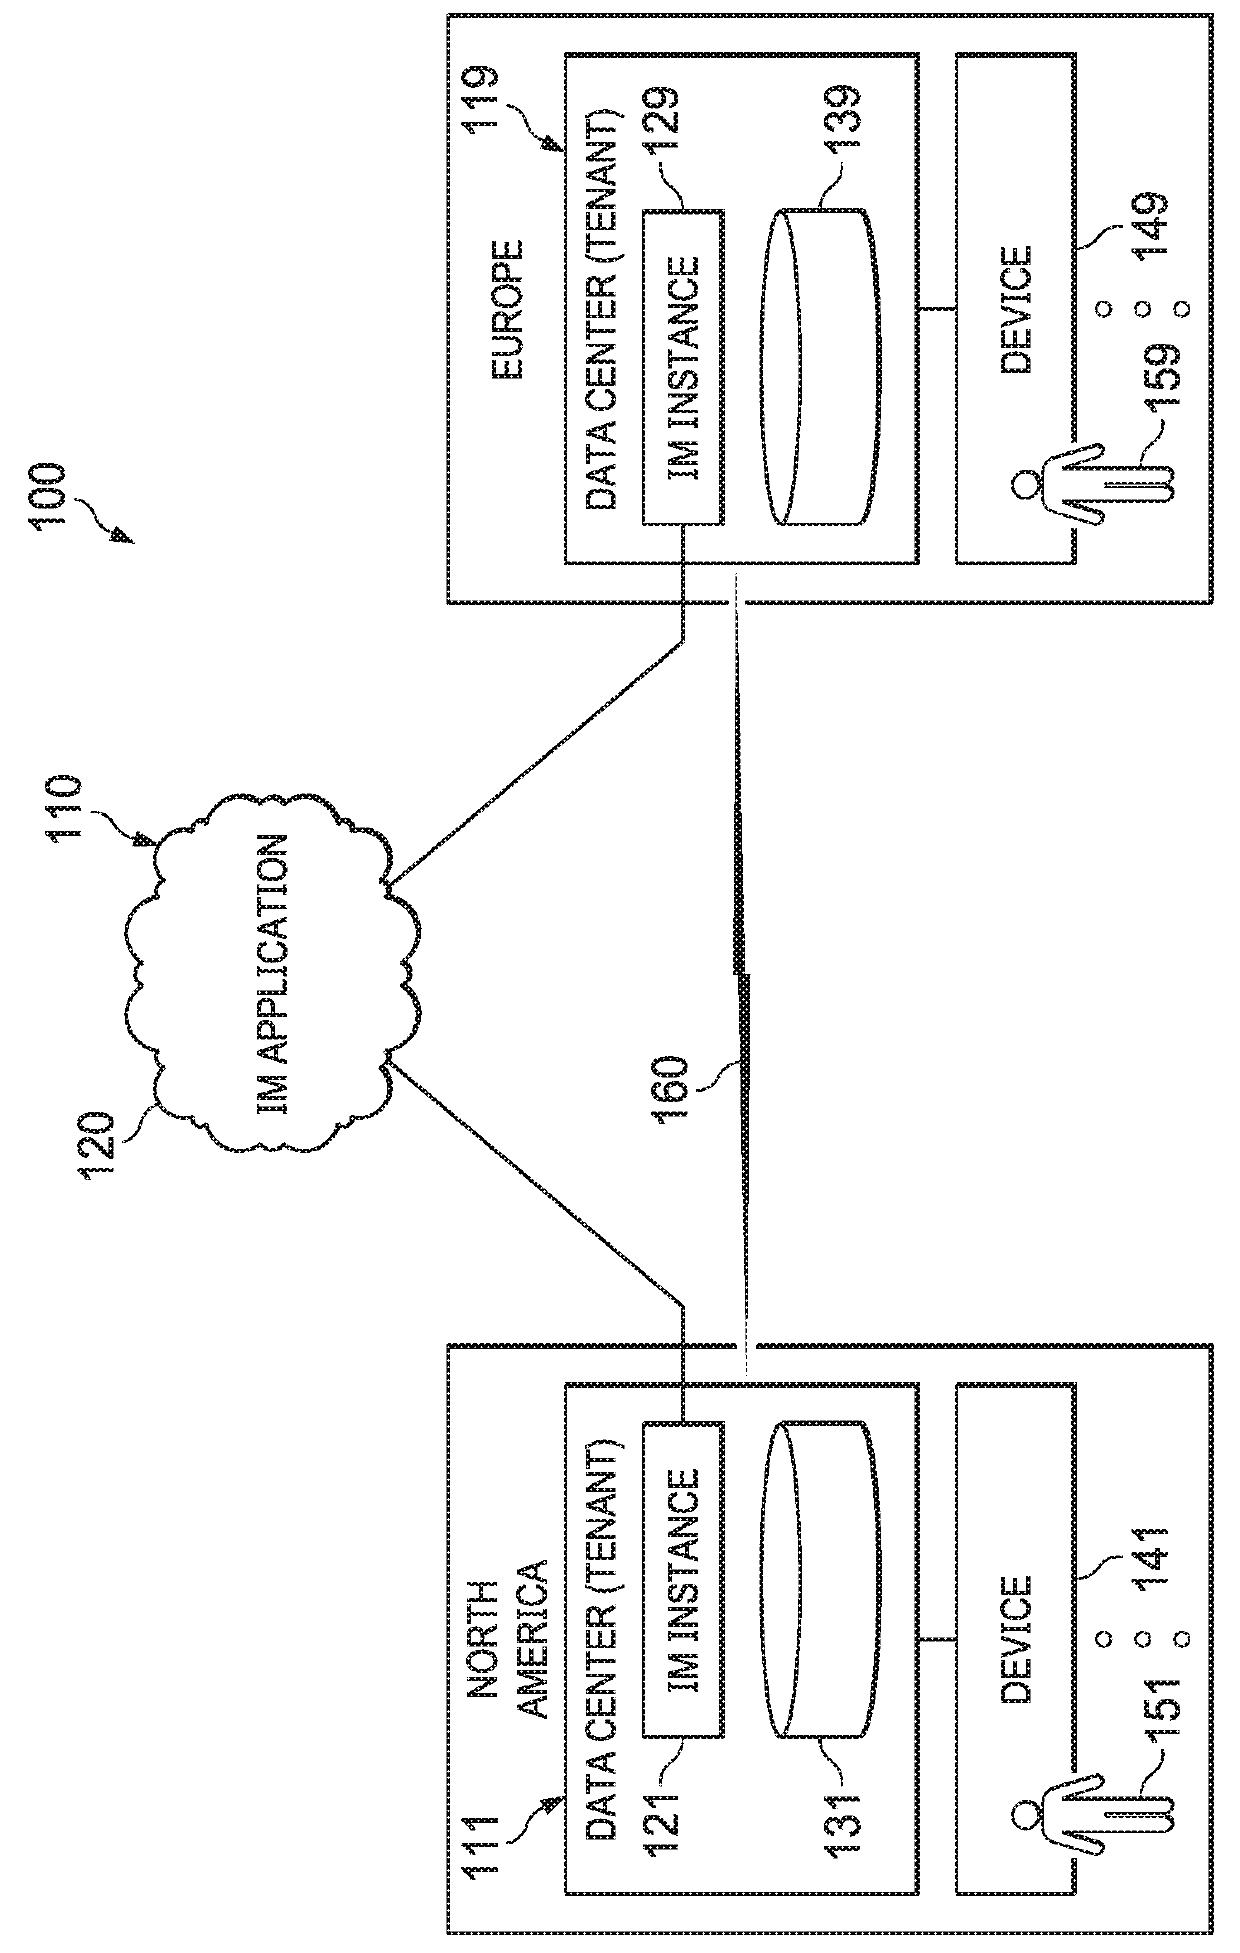 Systems and methods for multi-region data center connectivity